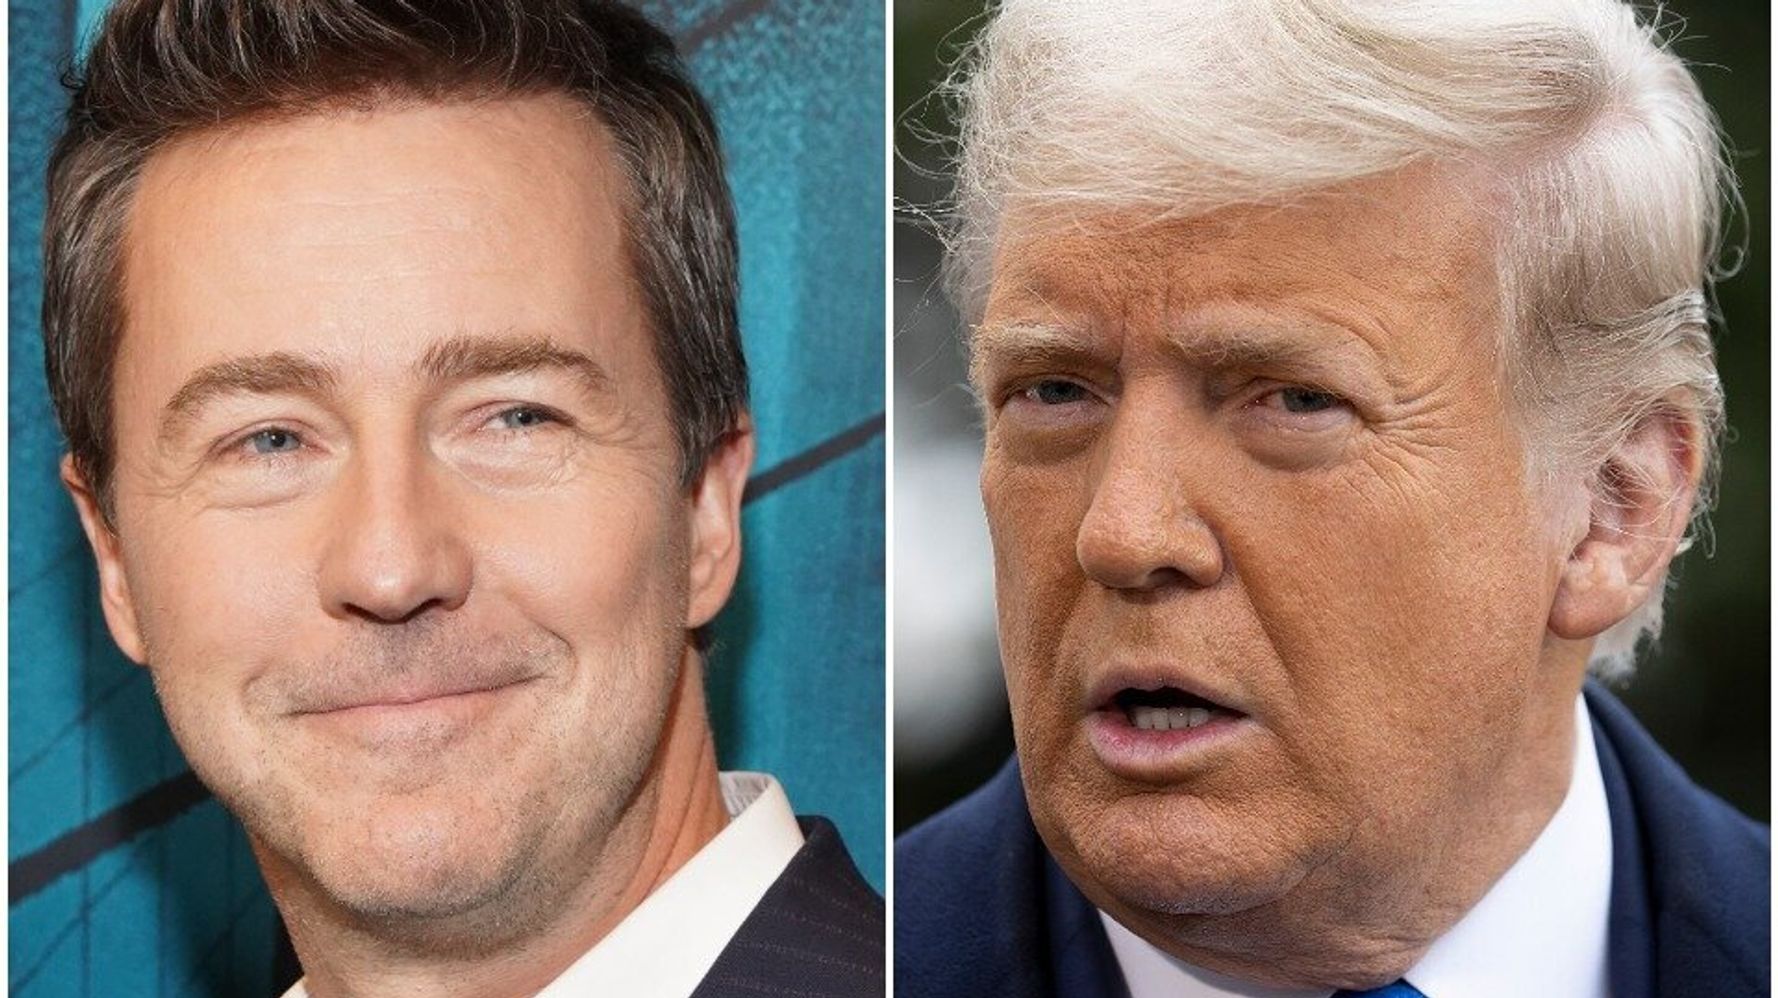 Edward Norton Compares 'Whiny' Trump's Actions To A Failed Poker Hand